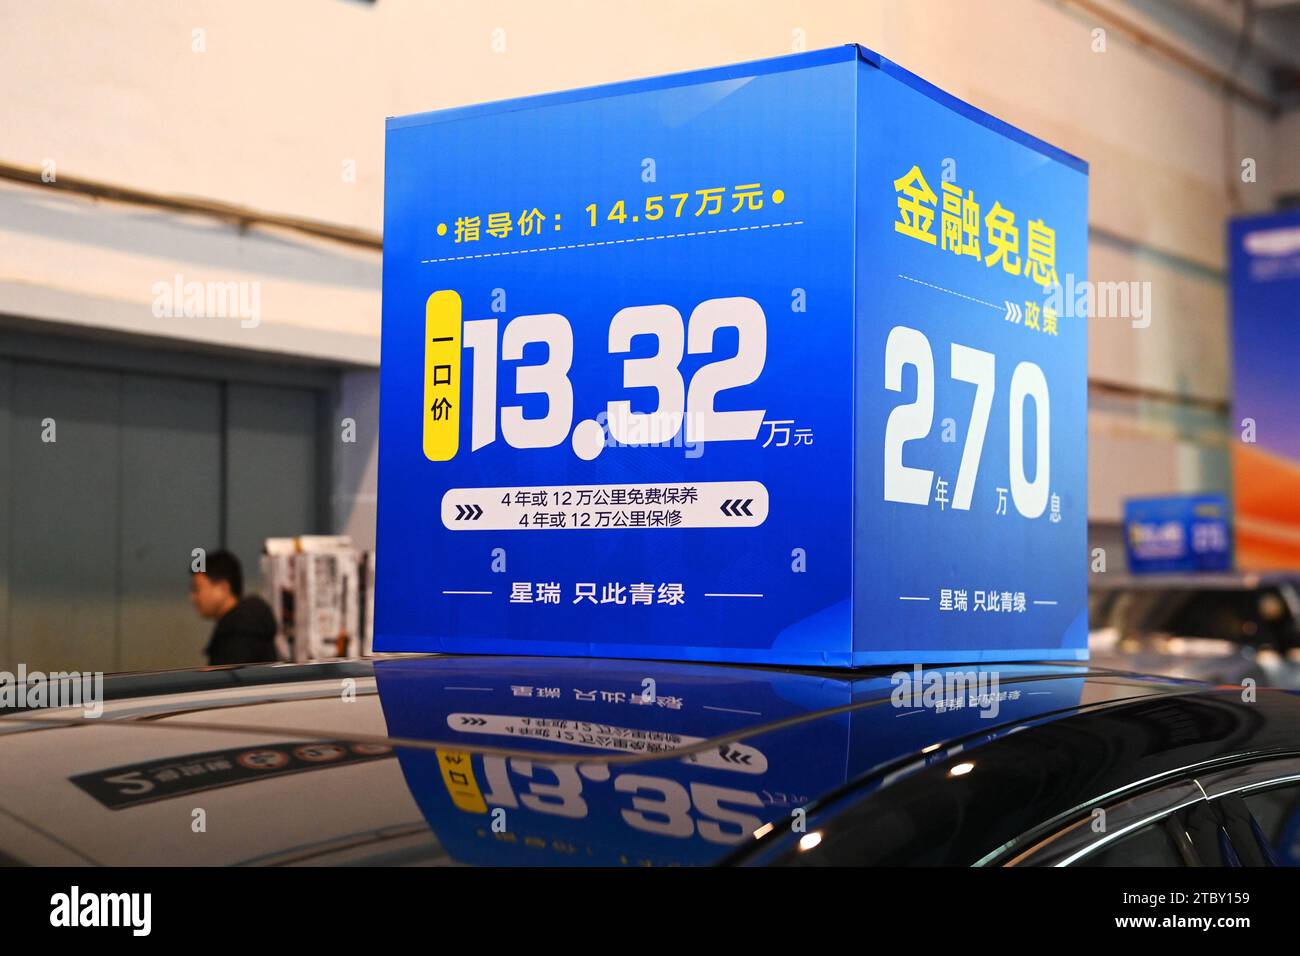 QINGDAO, CHINA - DECEMBER 9, 2023 - Car dealers carry out various promotional sales activities at the 15th Shandong International Auto Show in Qingdao Stock Photo